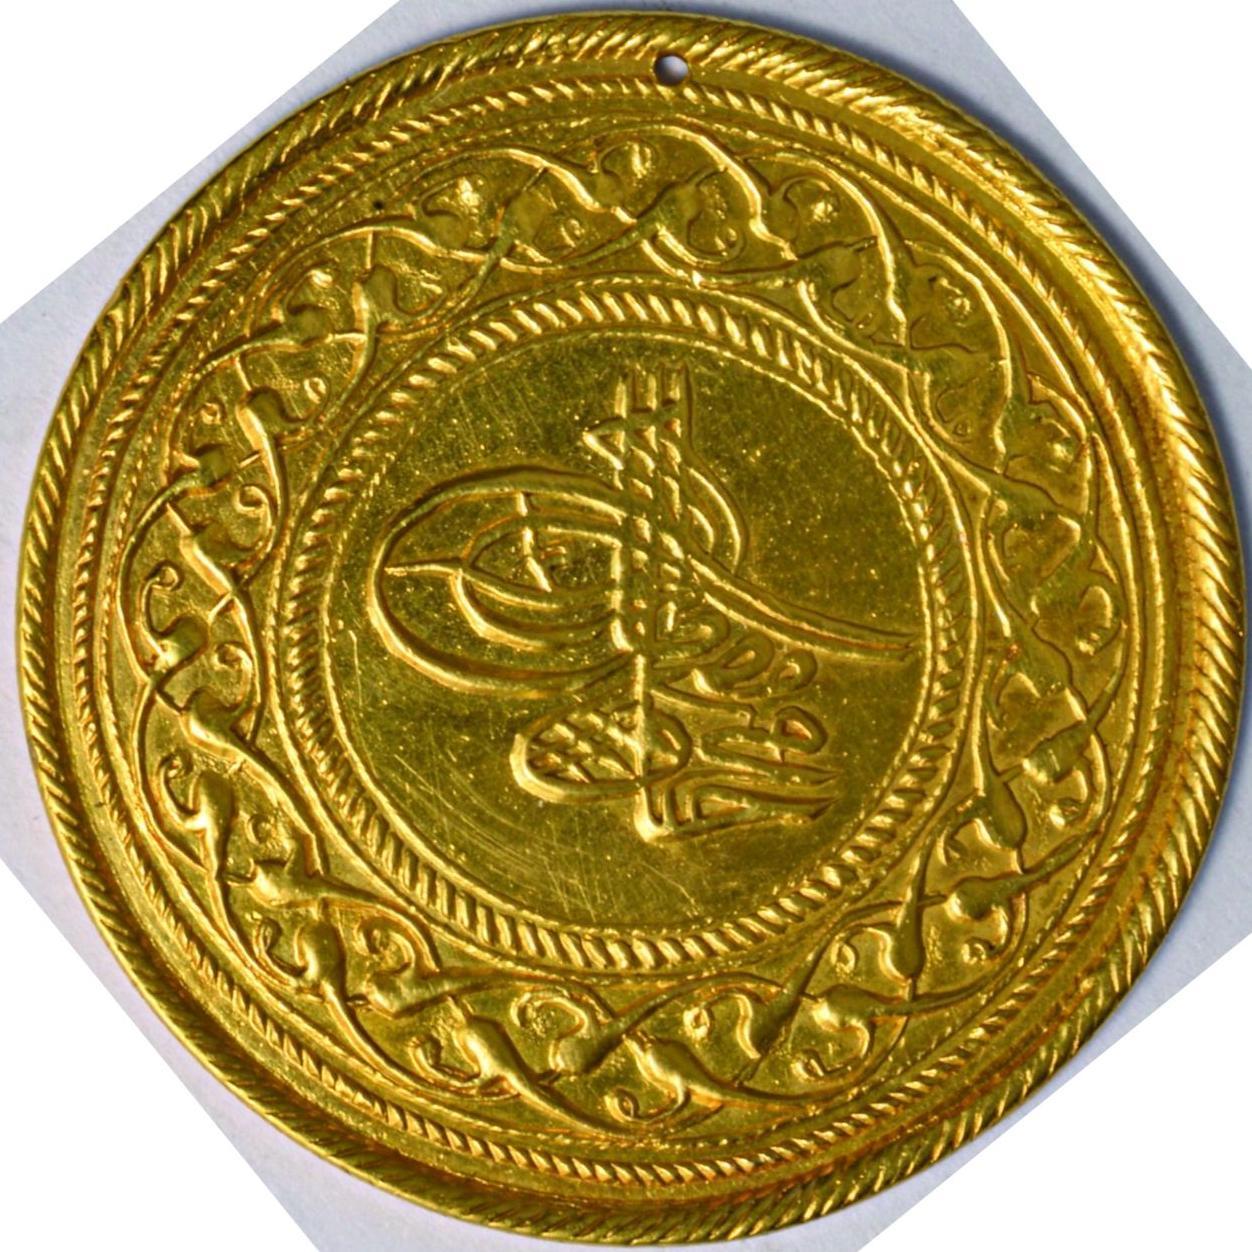 2c- Gold coins minted at Imperial Mint during the period of Sultan Ahmed III with the inscription“minted in ‘Islambol’” (Istanbul Archeology Museum, Coins Section)